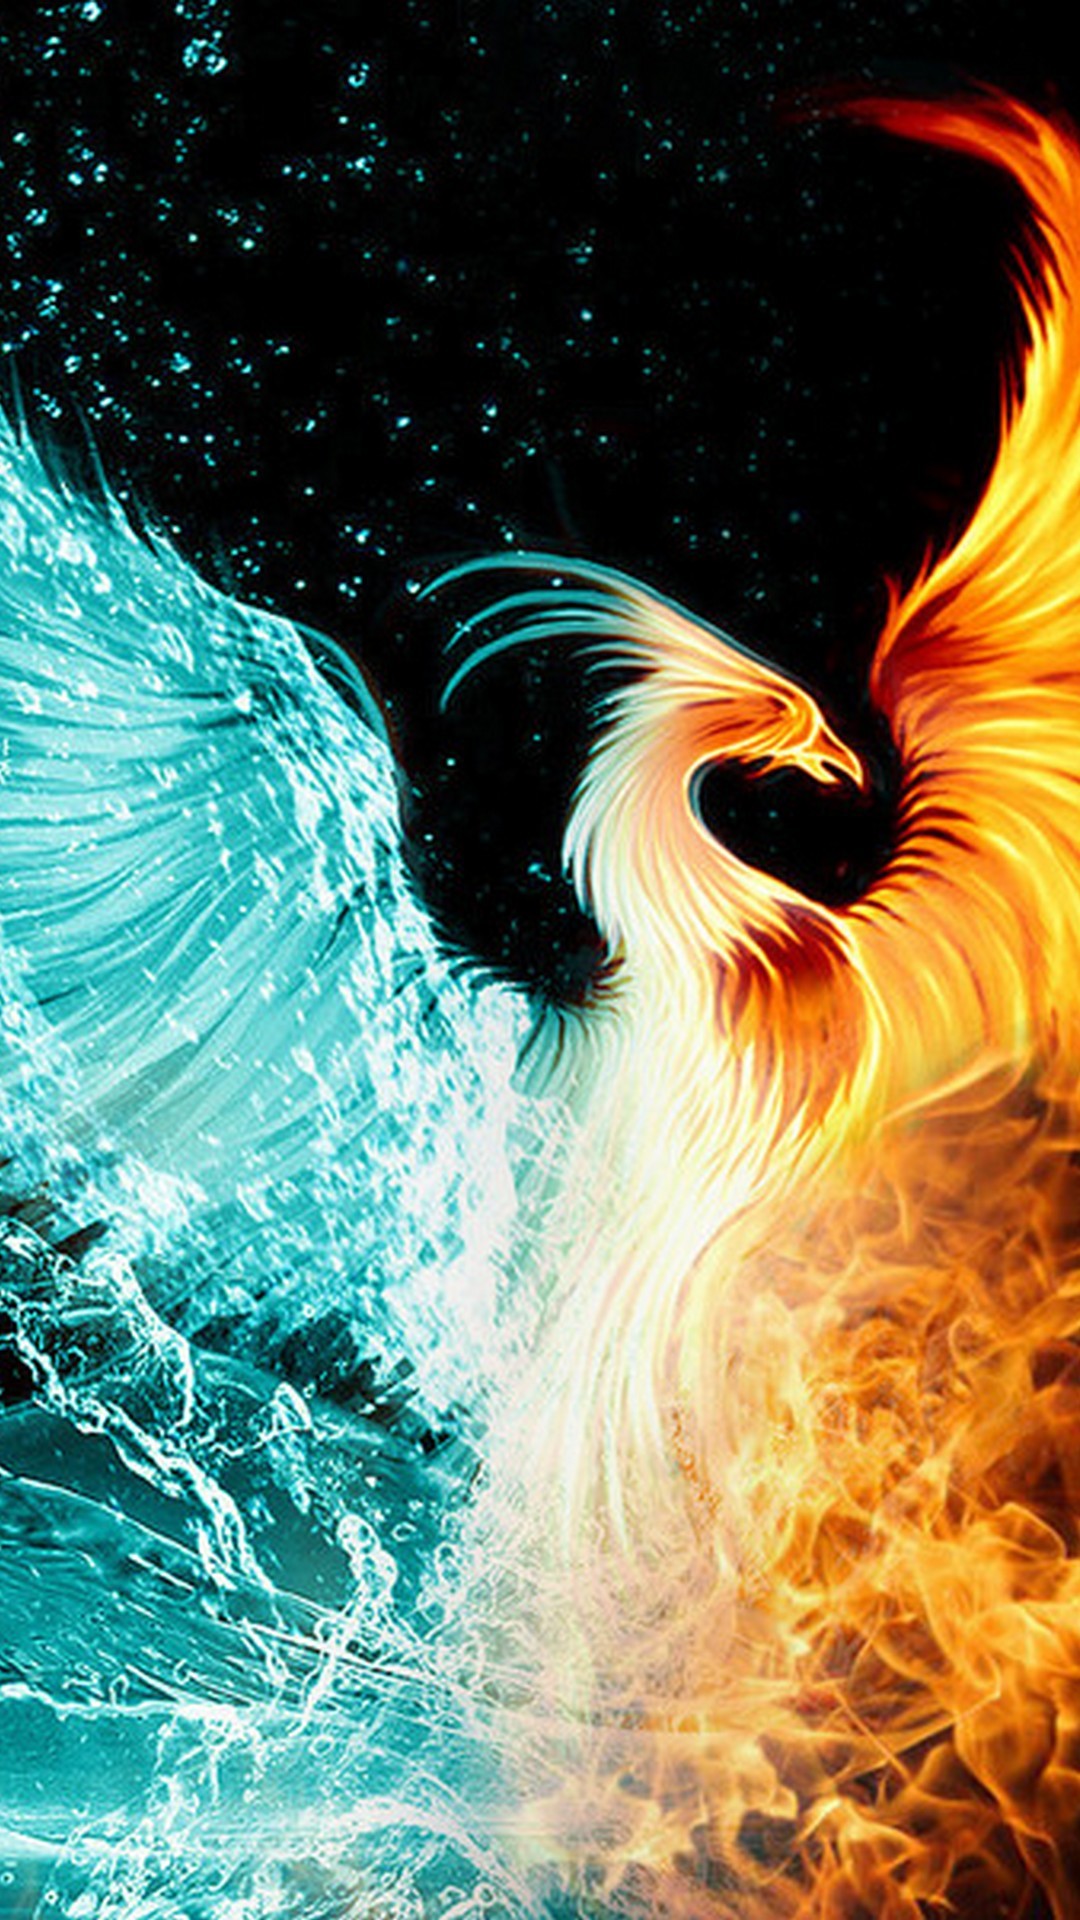 Phoenix Images iPhone Wallpaper with image resolution 1080x1920 pixel. You can make this wallpaper for your iPhone 5, 6, 7, 8, X backgrounds, Mobile Screensaver, or iPad Lock Screen